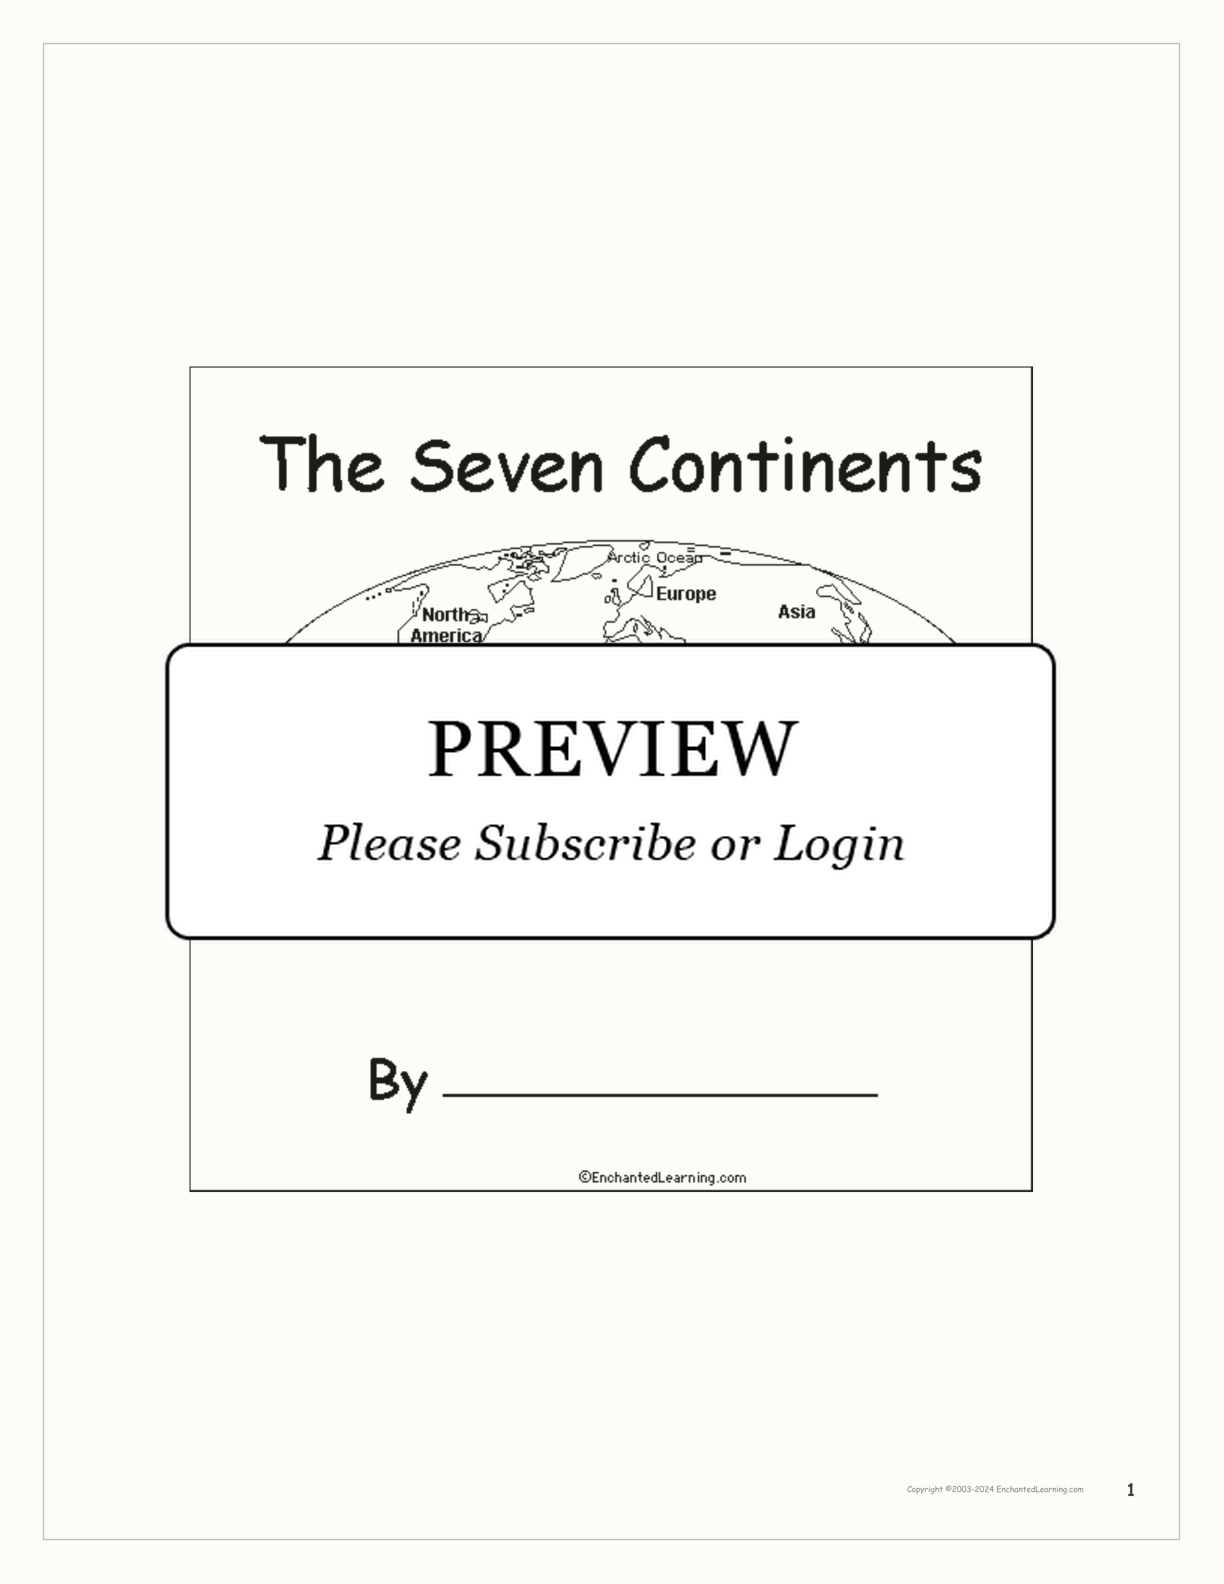 The Seven Continents Book interactive printout page 1